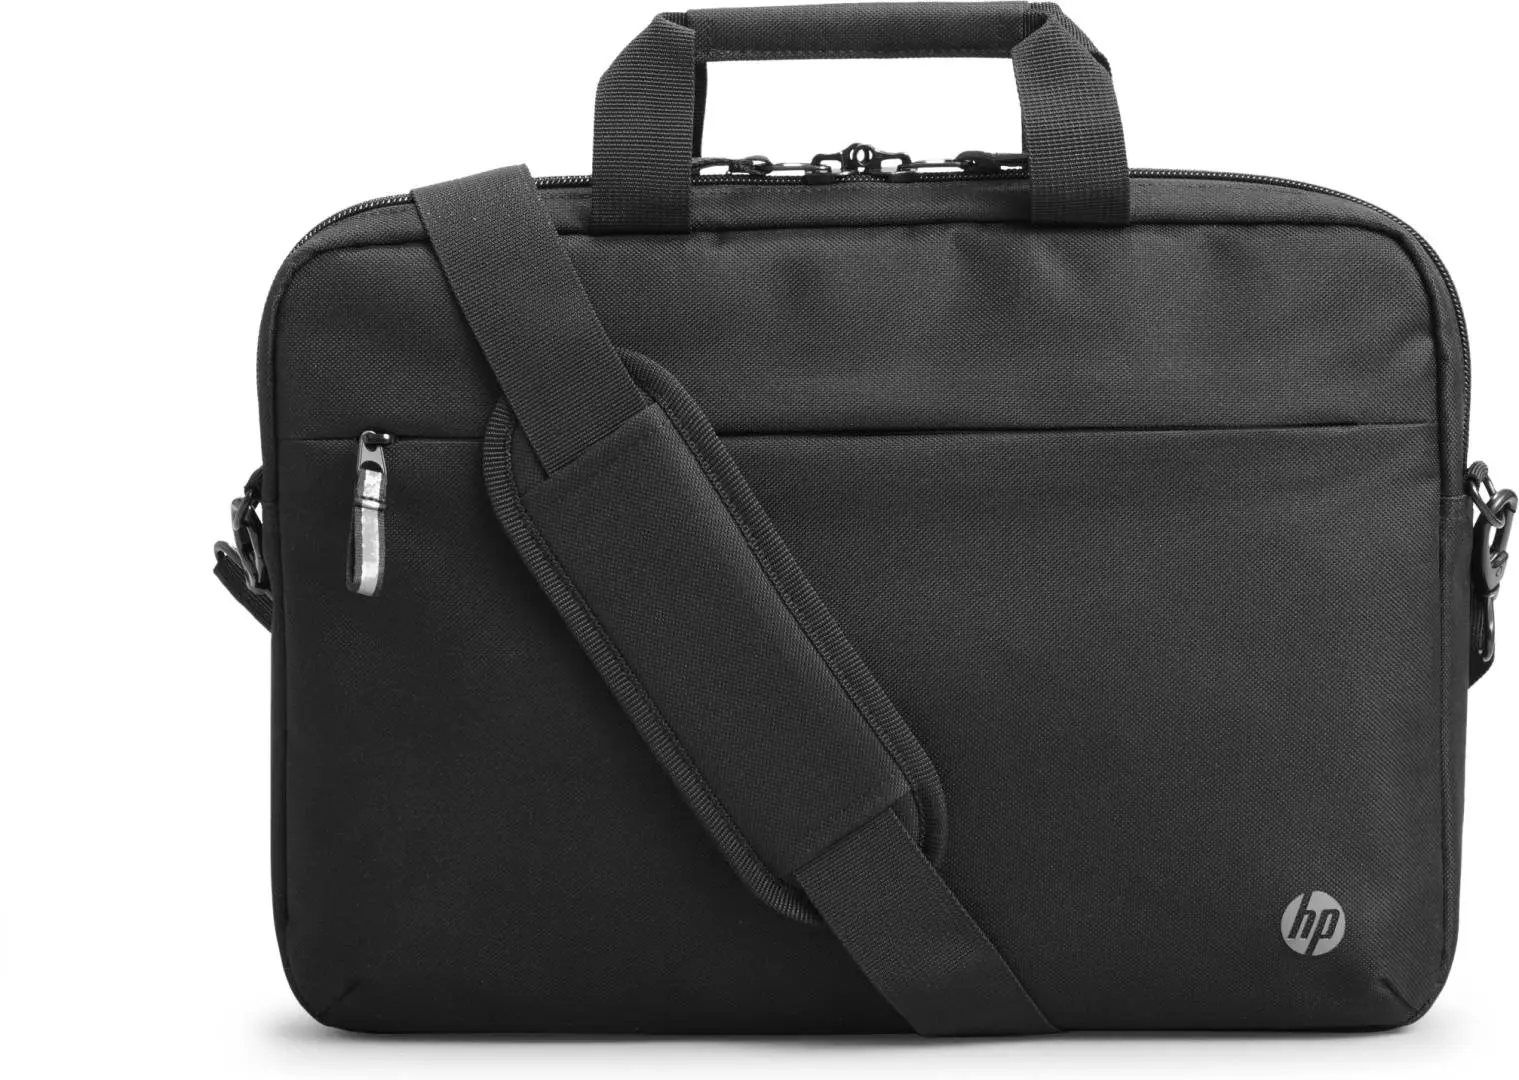 hp hewlett packard laptop case - Can I change the case of my HP laptop